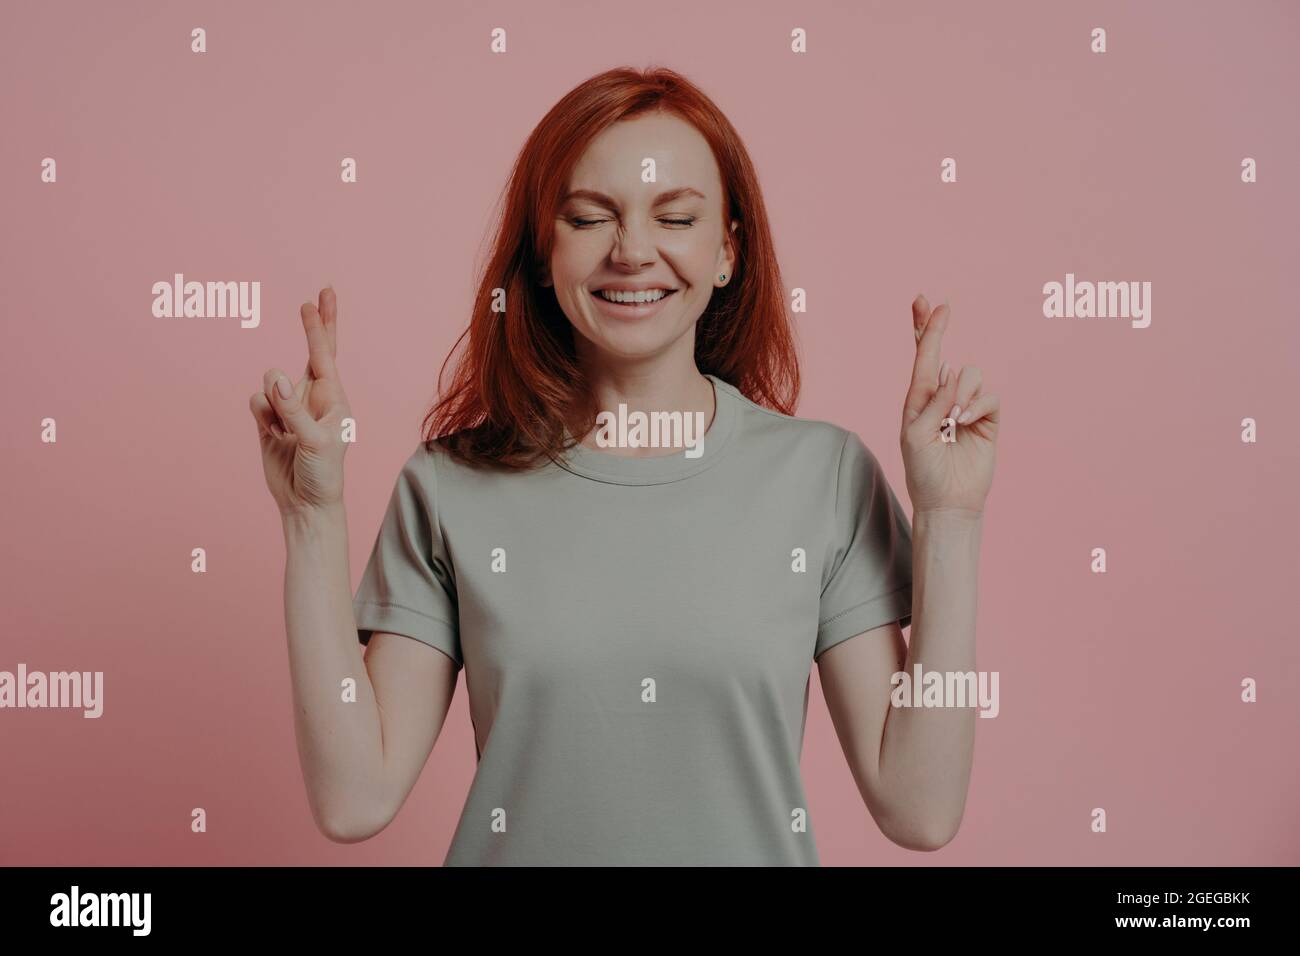 Hopeful red-haired female student crossing fingers with superstitious facial expression Stock Photo